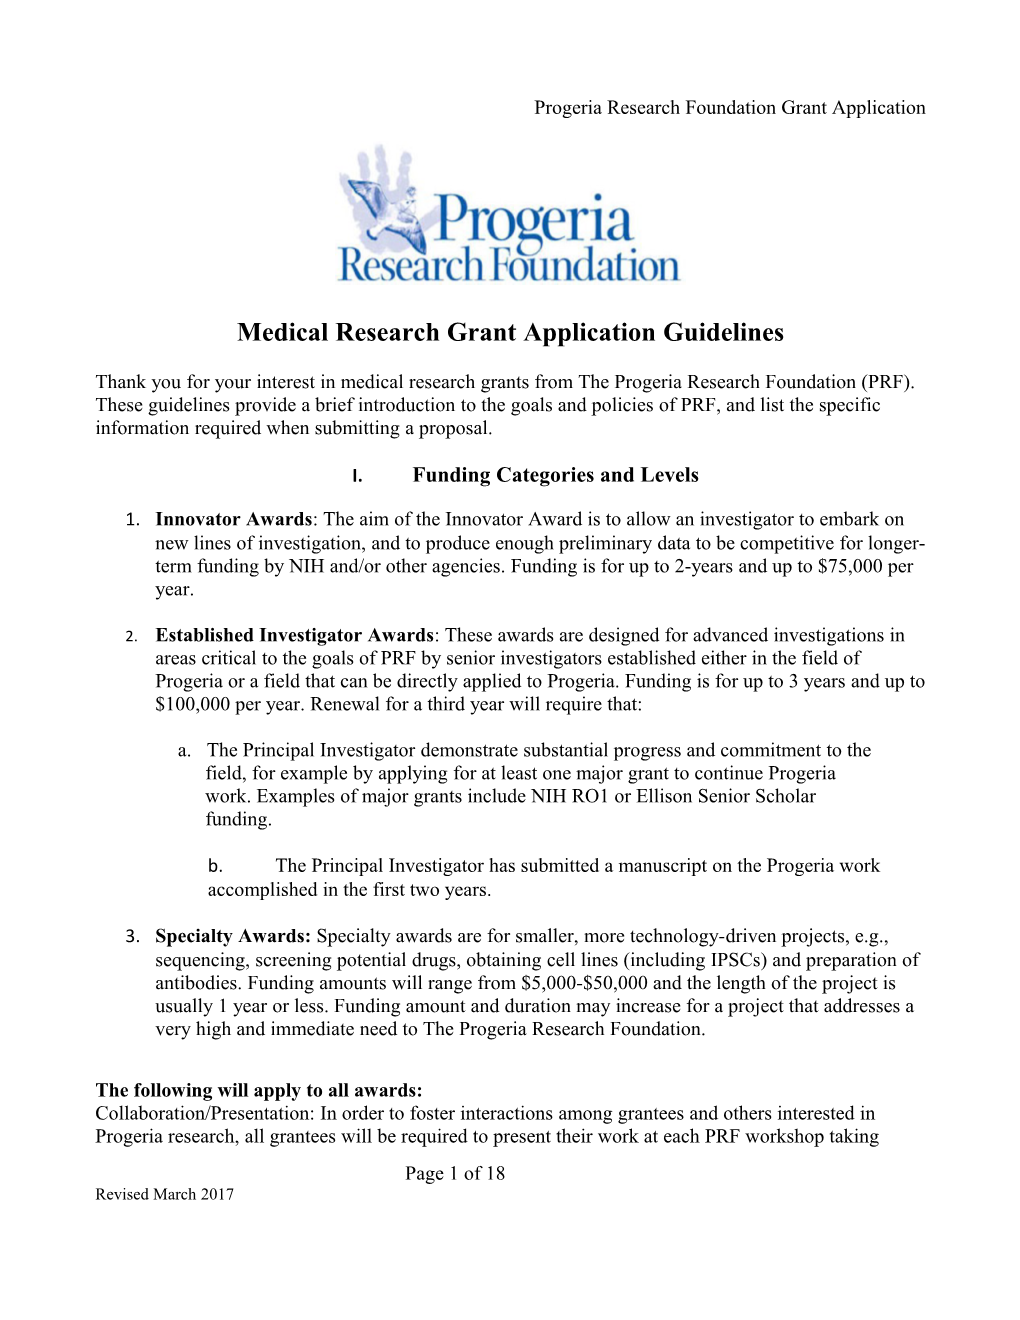 The Progeria Research Foundation Medical Research Grant Application Information